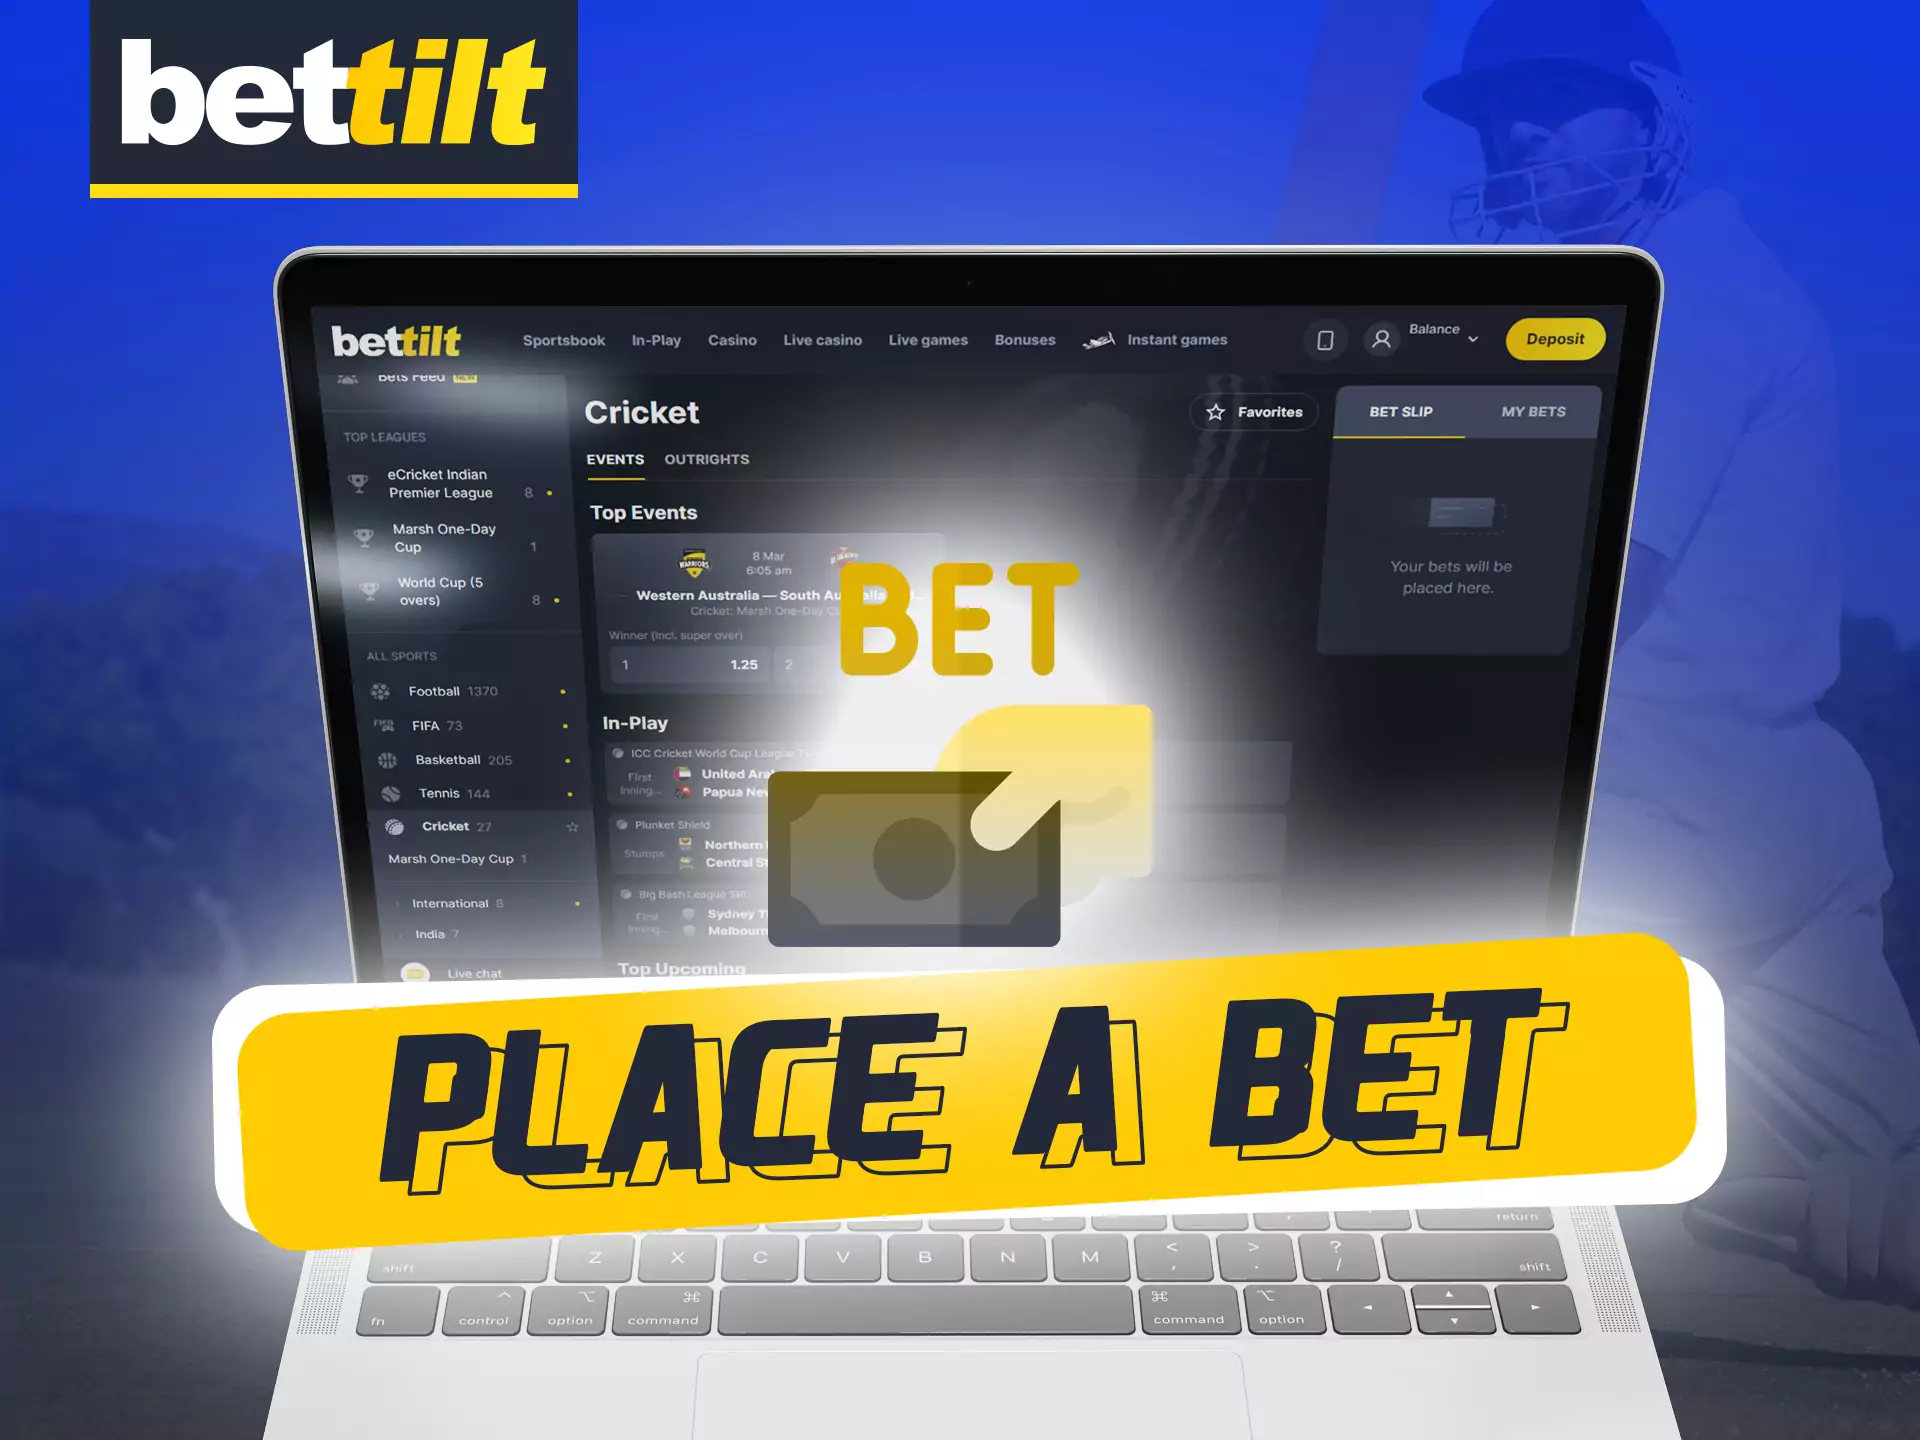 With these instructions, find out how easy it is for you to bet on Bettilt.